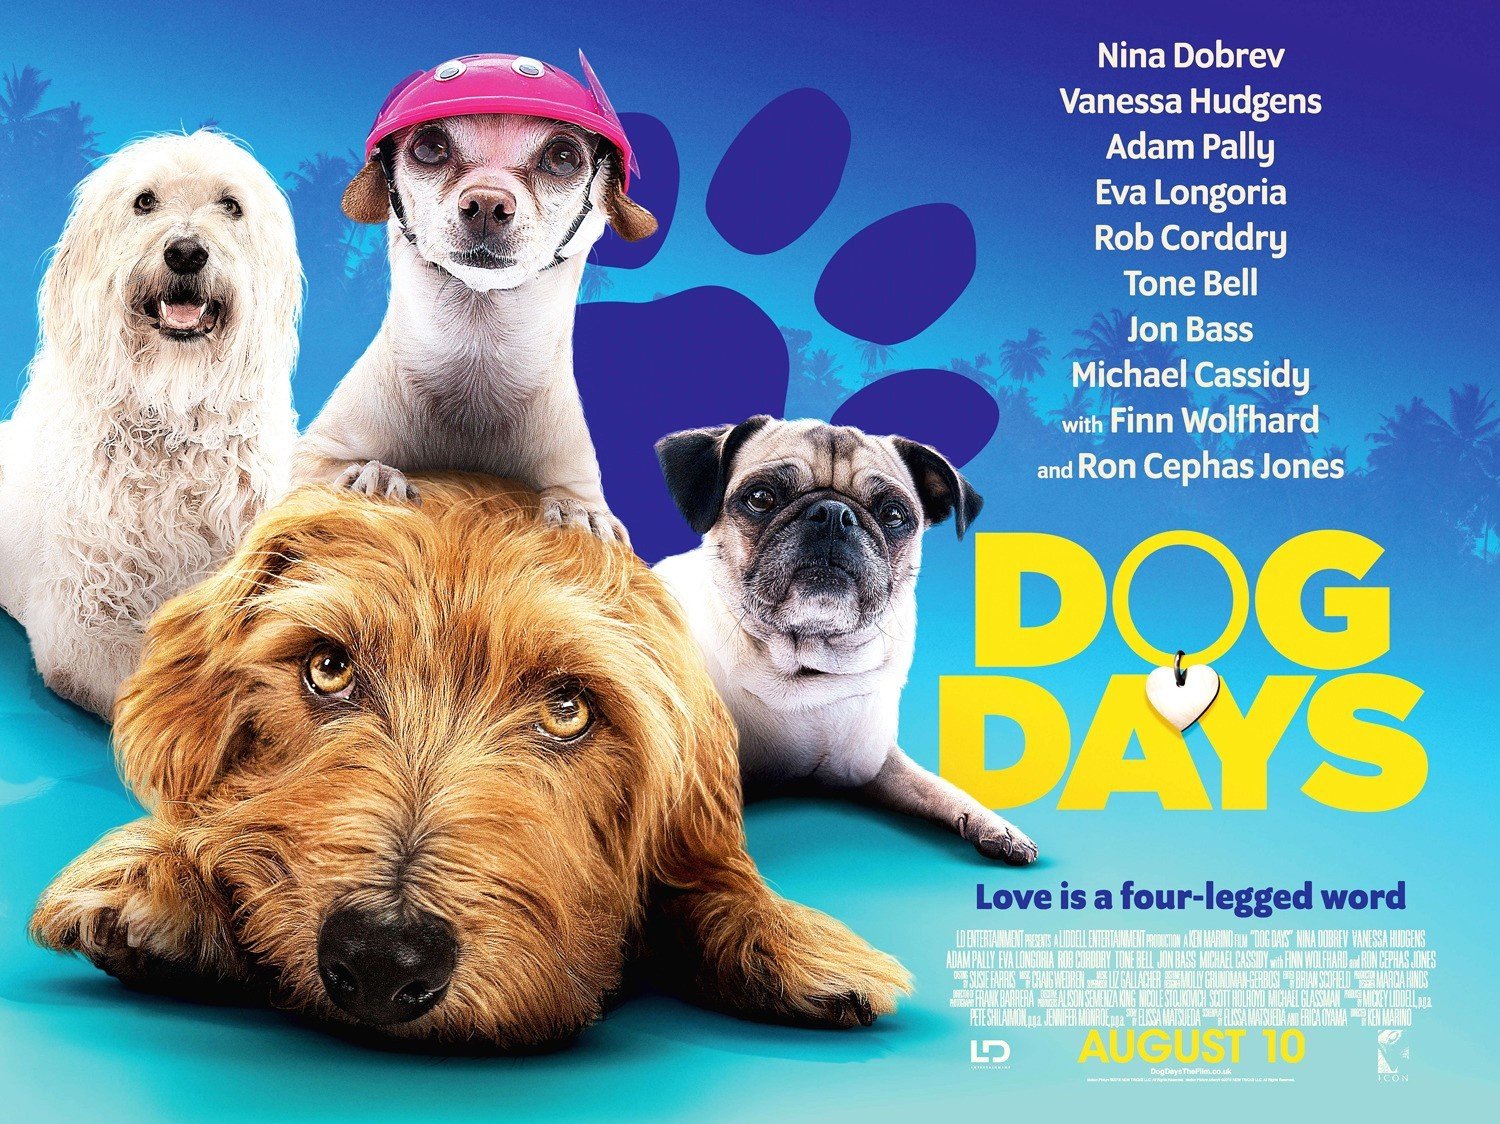 Dog Days (2018) Pictures, Trailer, Reviews, News, DVD and Soundtrack